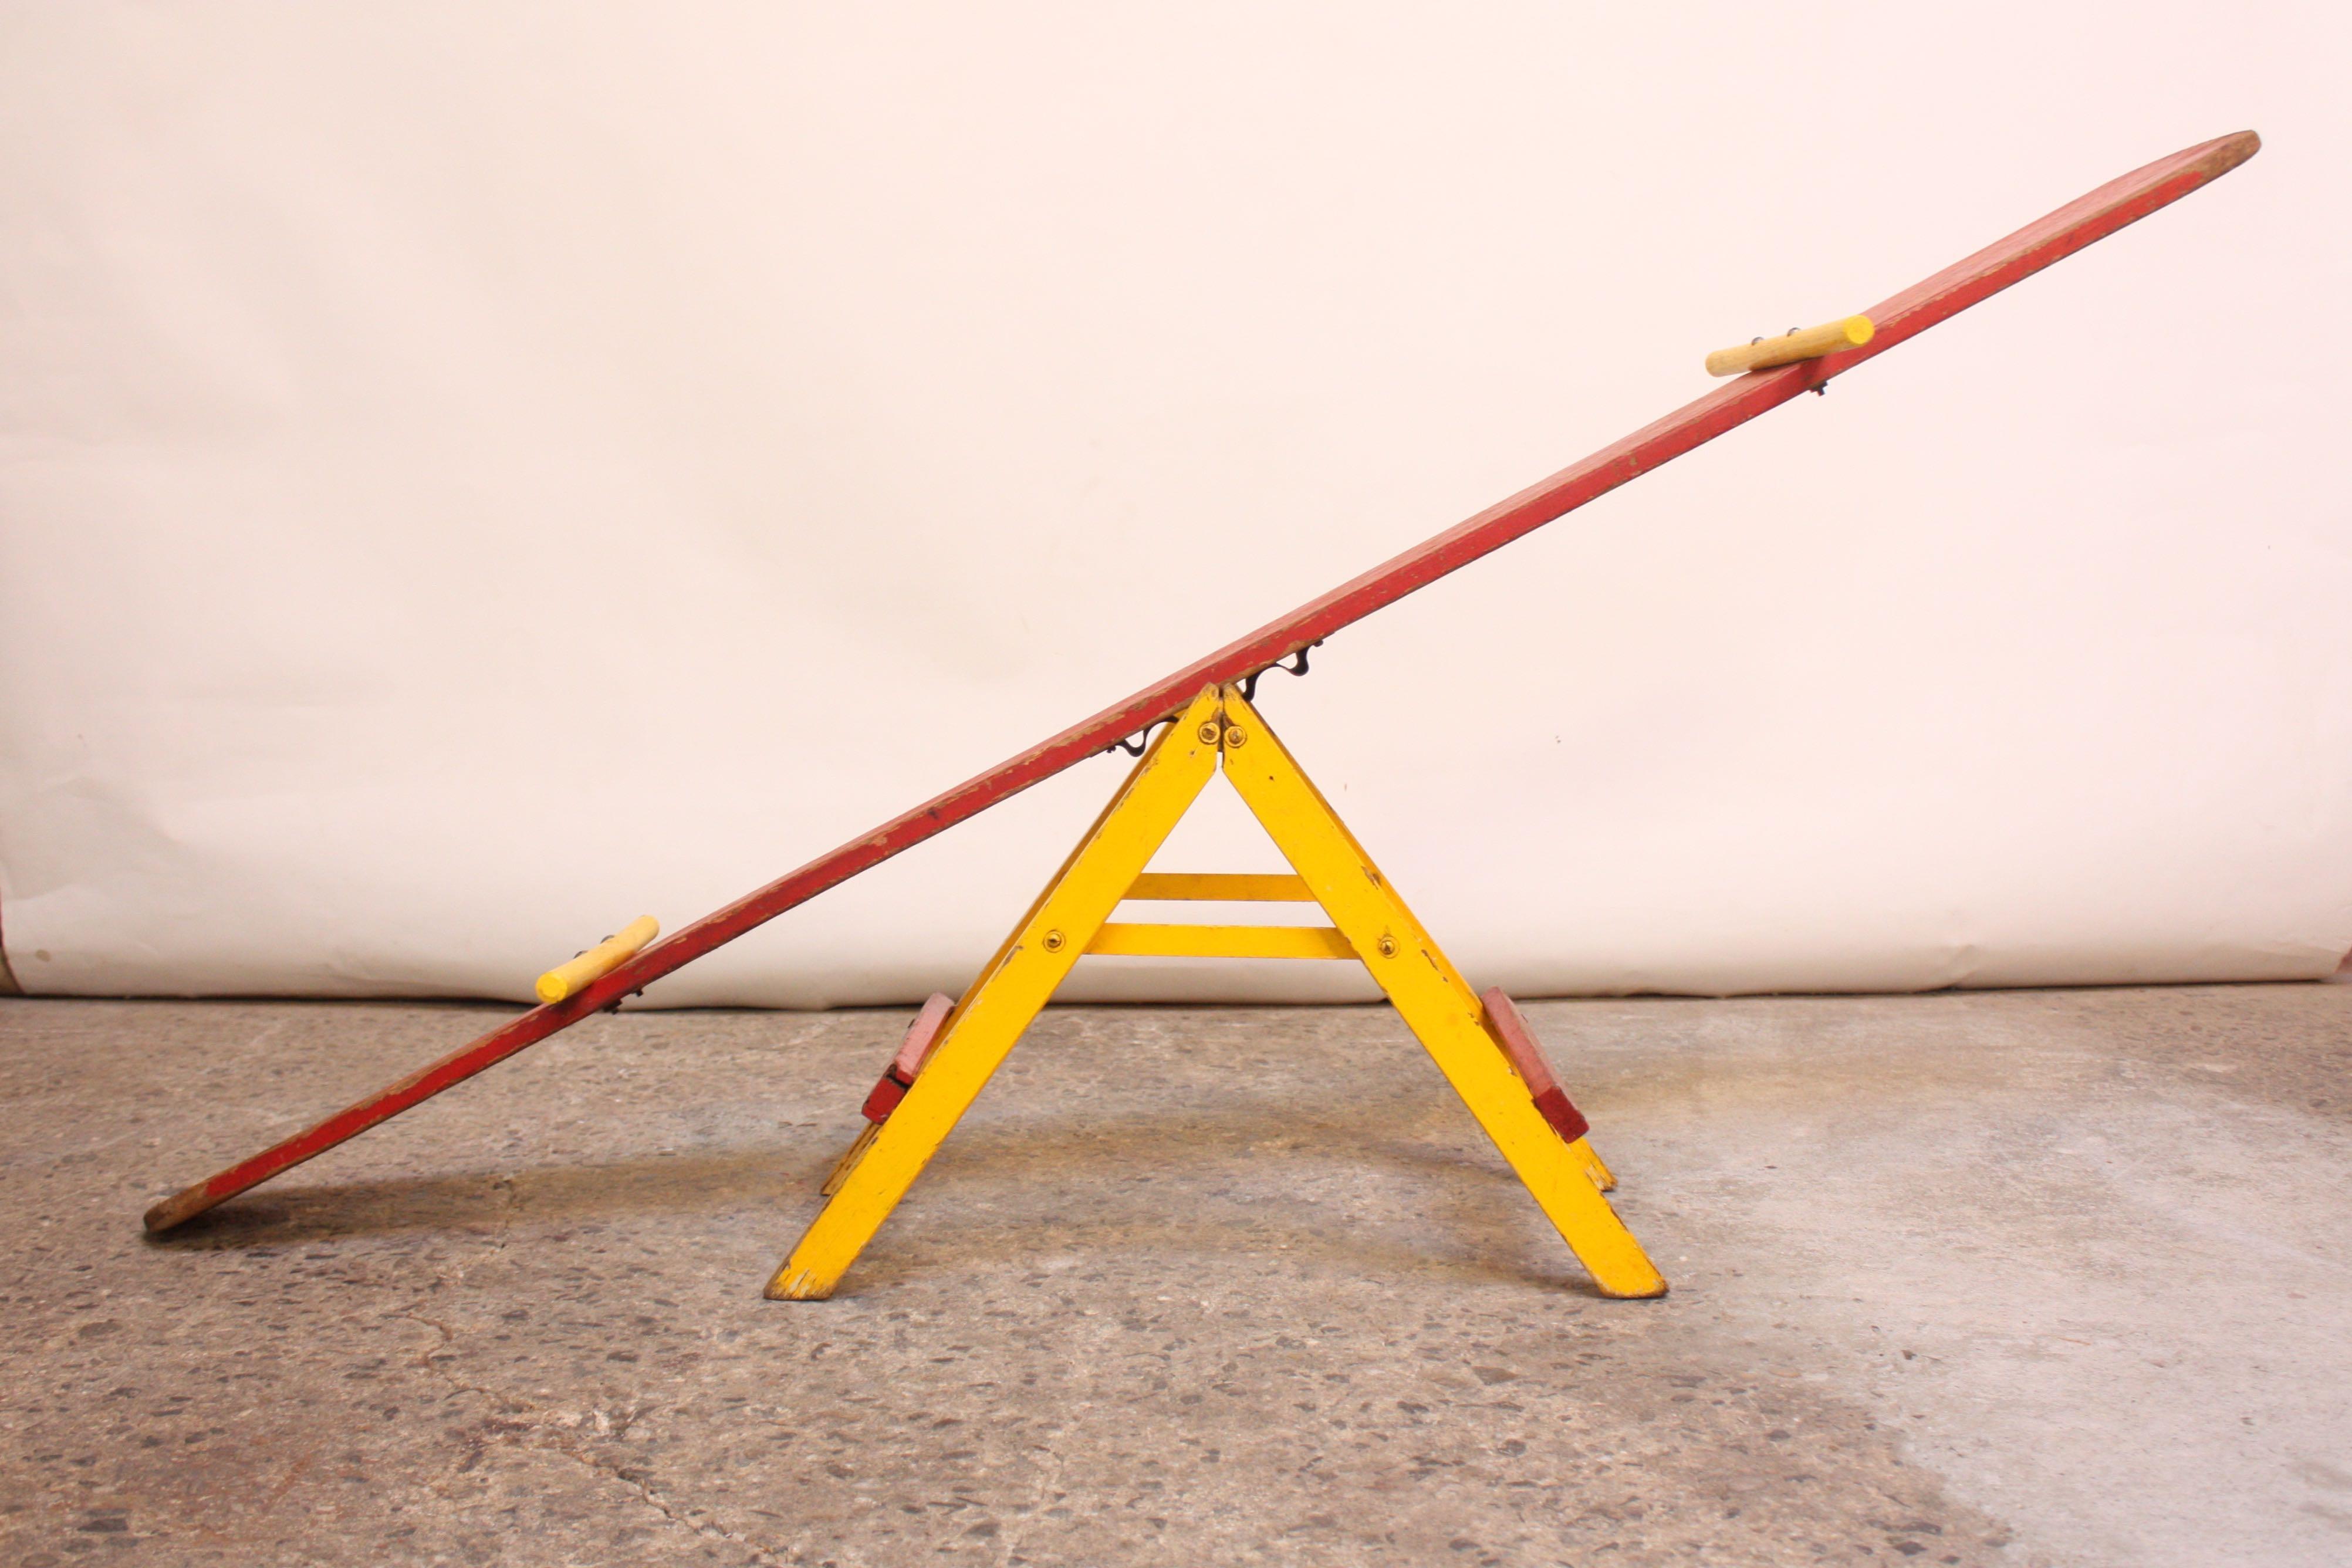 how to make a seesaw with popsicle sticks